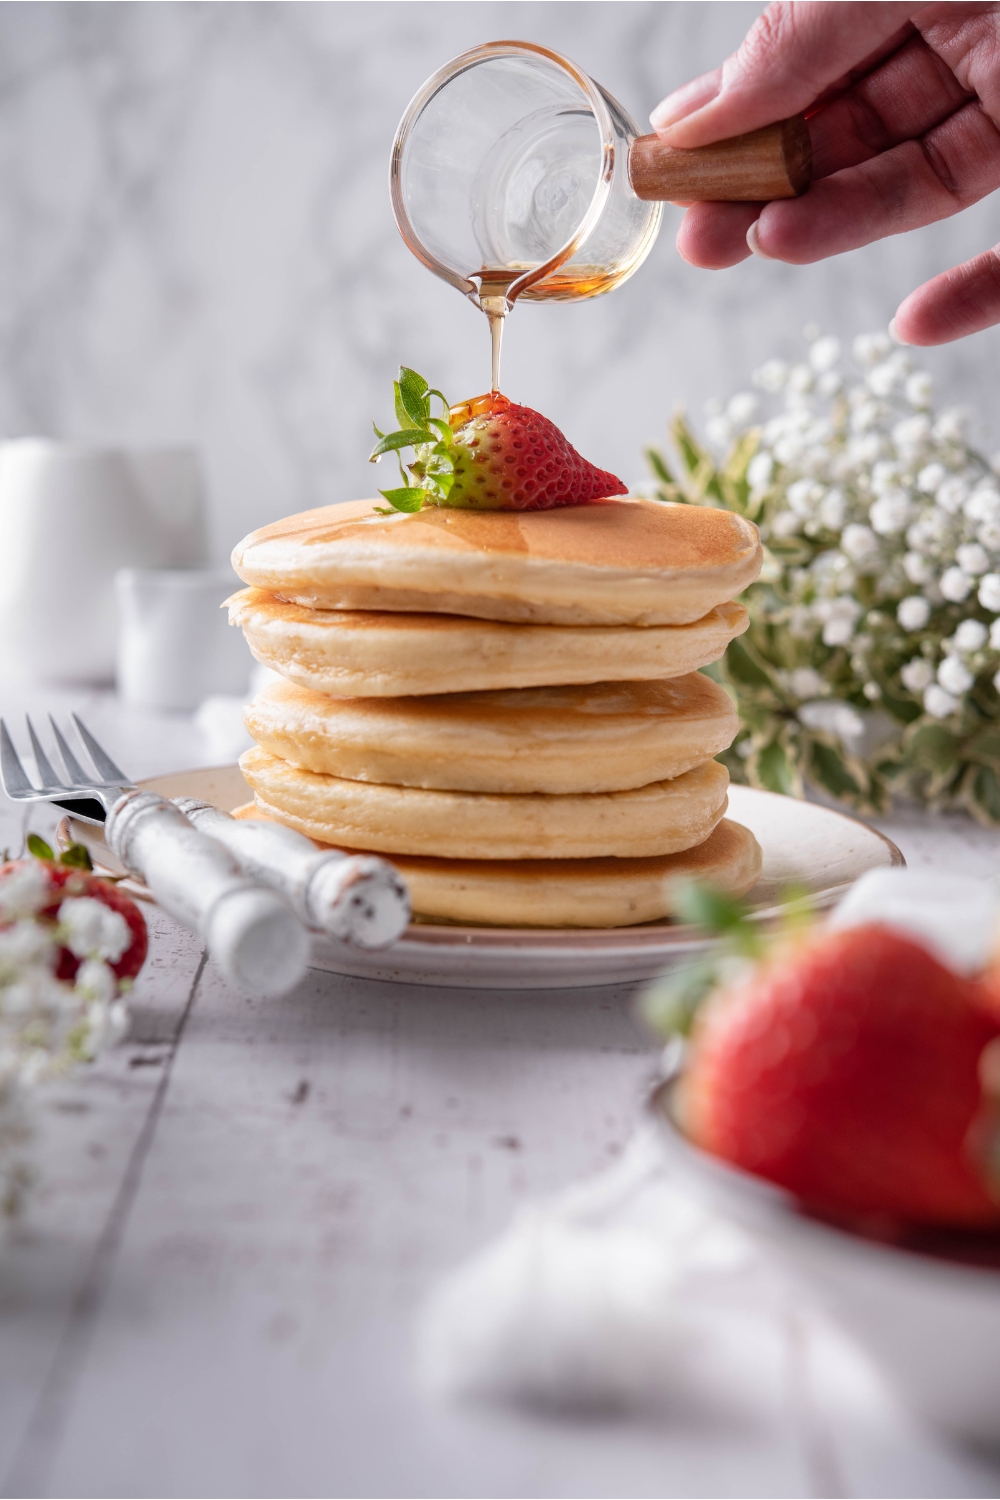 A hand pouring maple syrup over a giant stack of fluffy pancakes. The pancakes have a single strawberry on top and a set of silverware next to them.